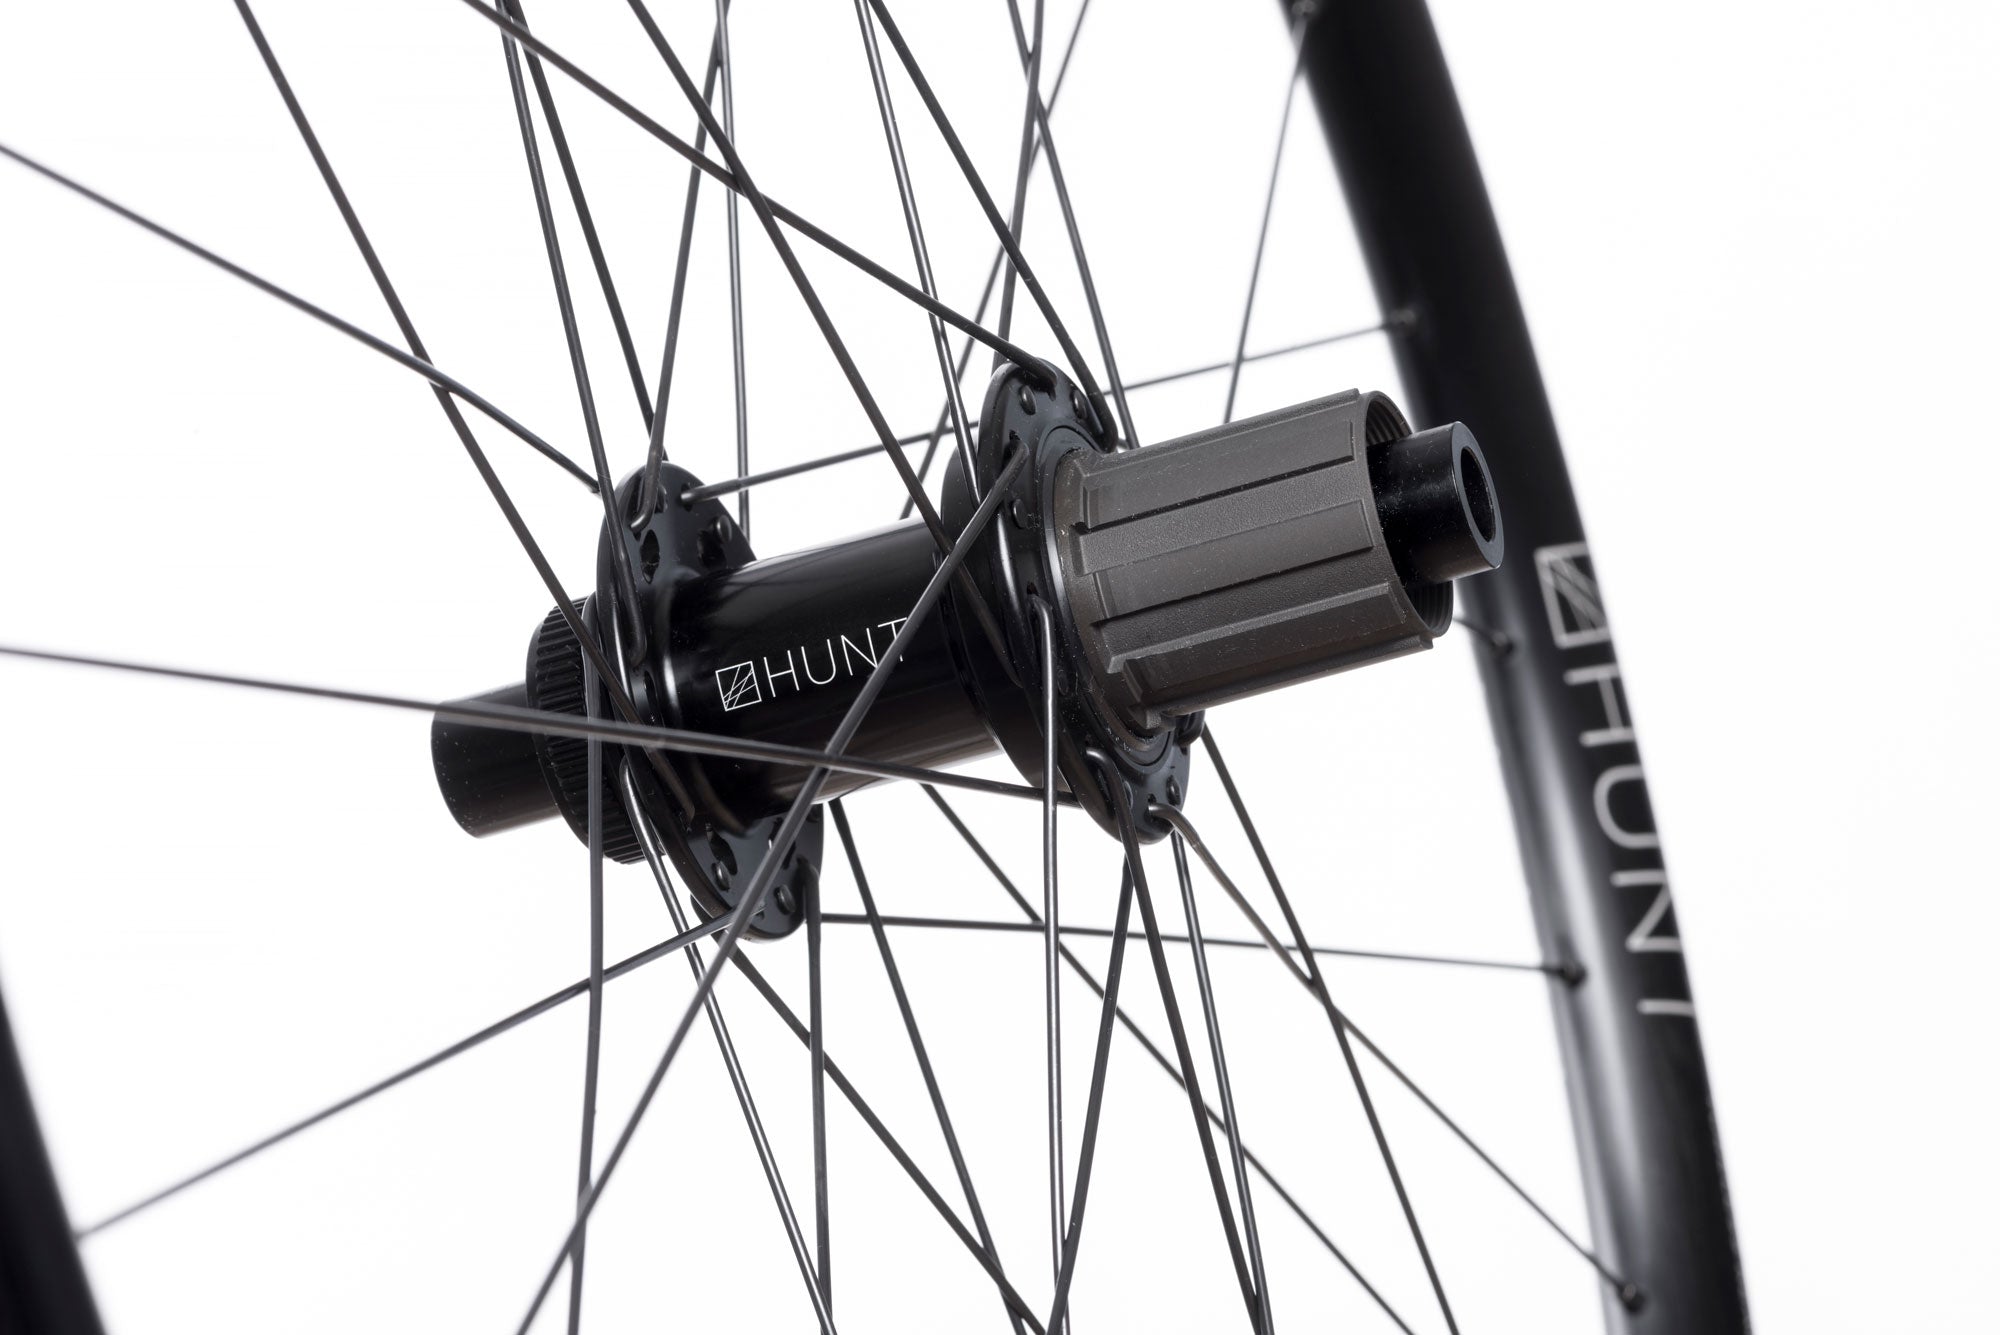 <h1>Freehub Body</h1><i>Durability is a theme for HUNT as time and money you spend fixing is time and money you cannot spend riding or upgrading your bikes. As a result, we've developed the H_CERAMIK coating to provide excellent durability and protect against cassette sprocket damage often seen on standard alloy freehub bodies.</i>